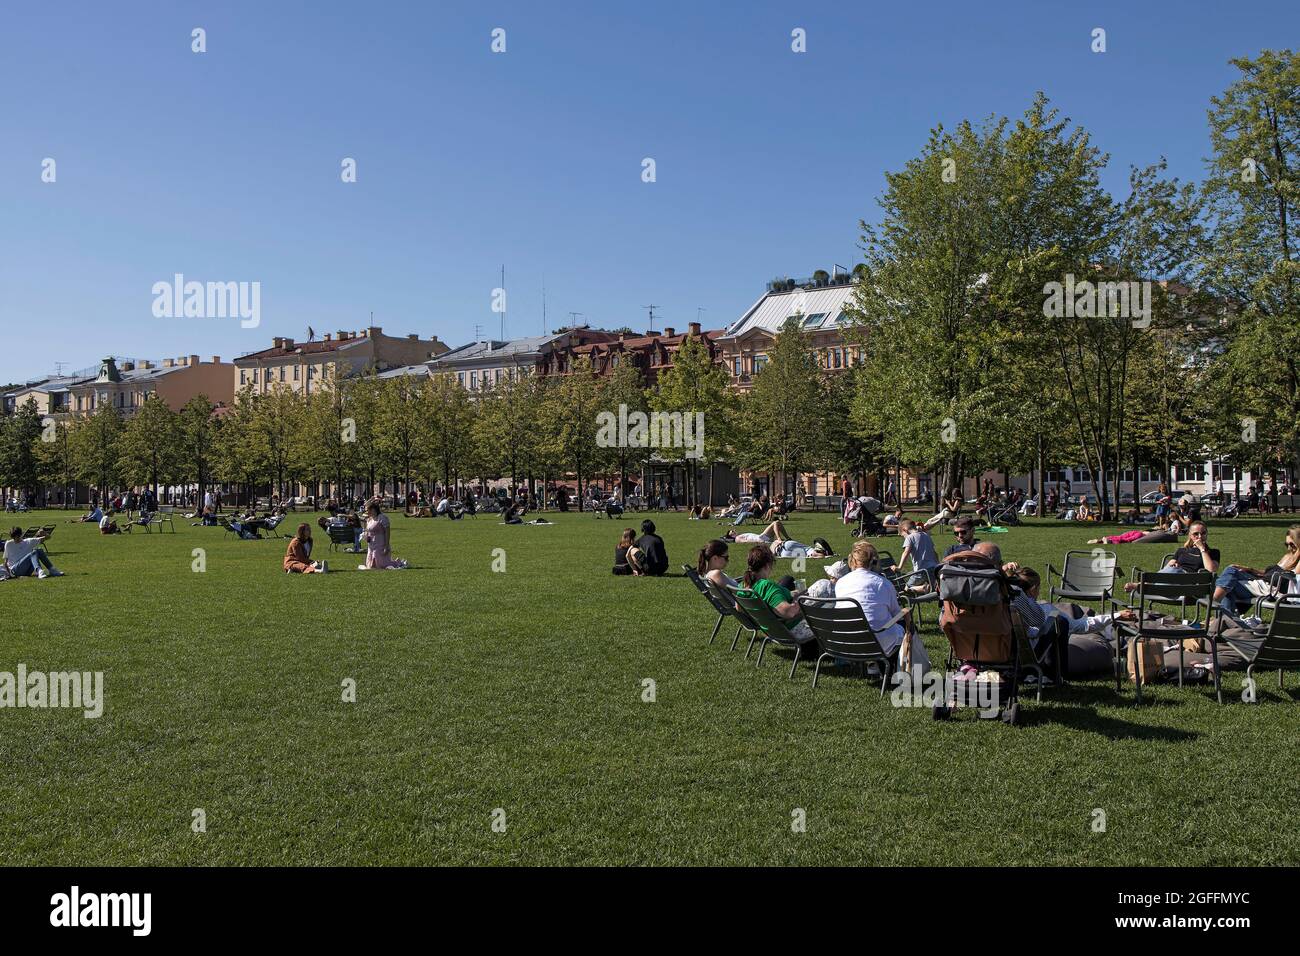 July 27, 2021 - St. Petersburg, Russia: People relaxing in the New Holland island of the city, modern hipster place to spend weekend. Green lawn is fu Stock Photo